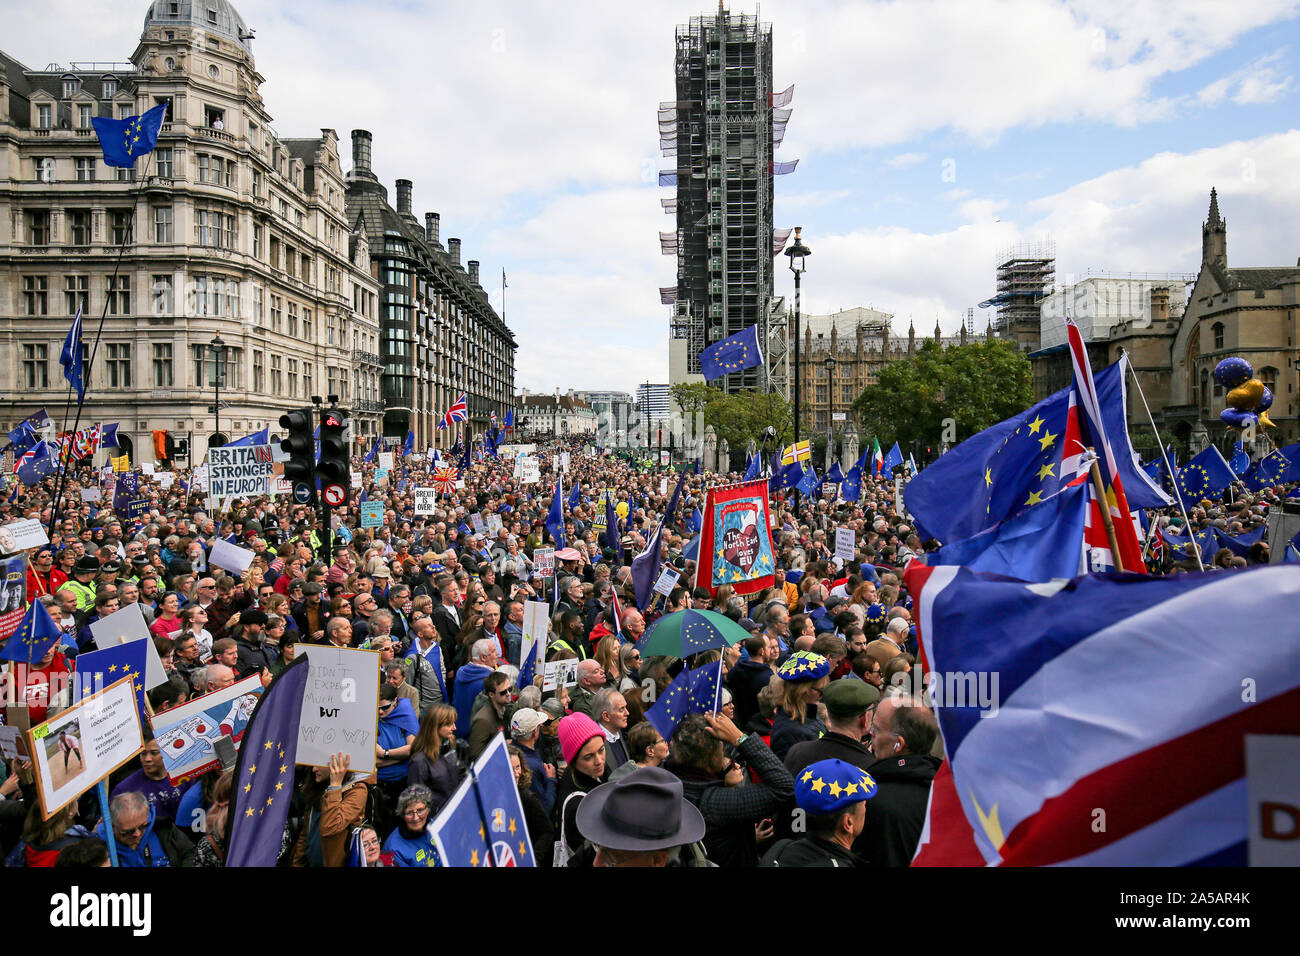 Anti-Brexit protesters fill Parliament Square in London, after Prime Minister Boris Johnson delivered a statement in the House of Commons, on his new Brexit deal on what has been dubbed 'Super Saturday'. Stock Photo